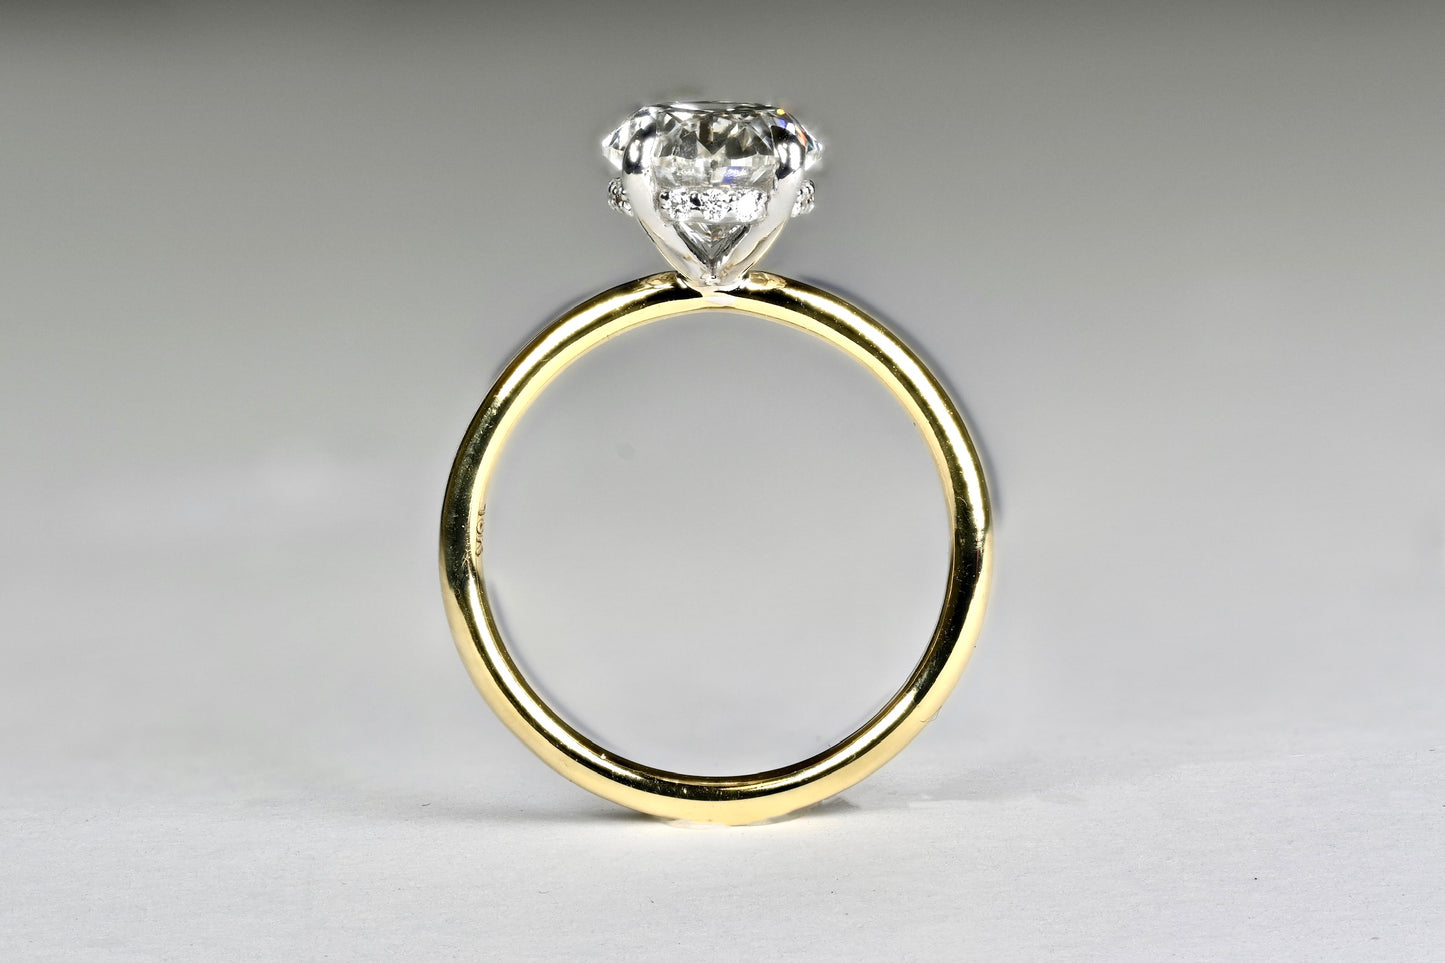 3.02 Carat Oval Engagement Ring